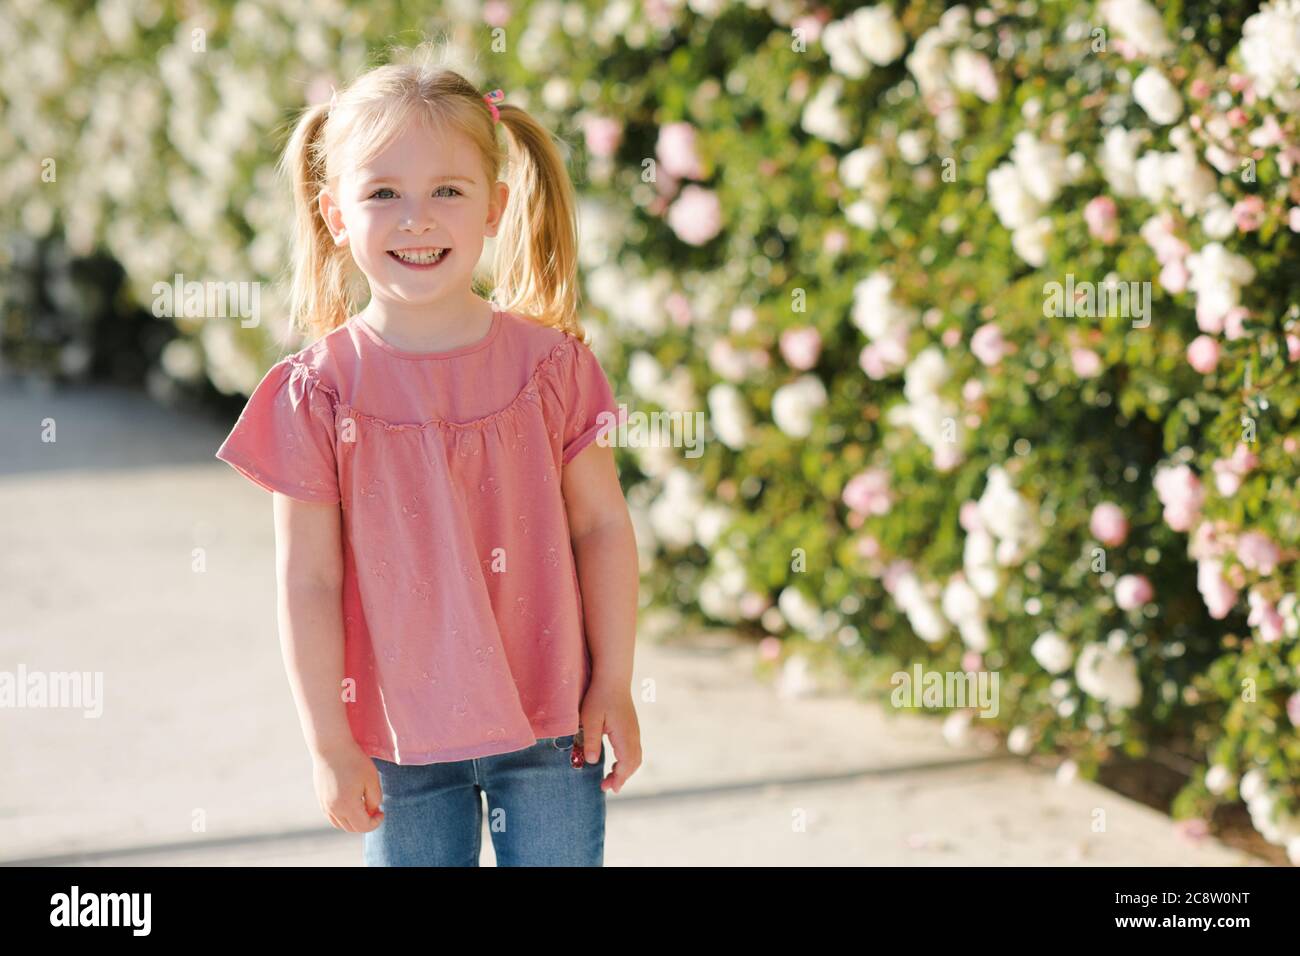 Funny child girl 2-3 year old smiling over rose flower background closeup. Looking at camera. Childhood. Summer season. Happiness. Stock Photo